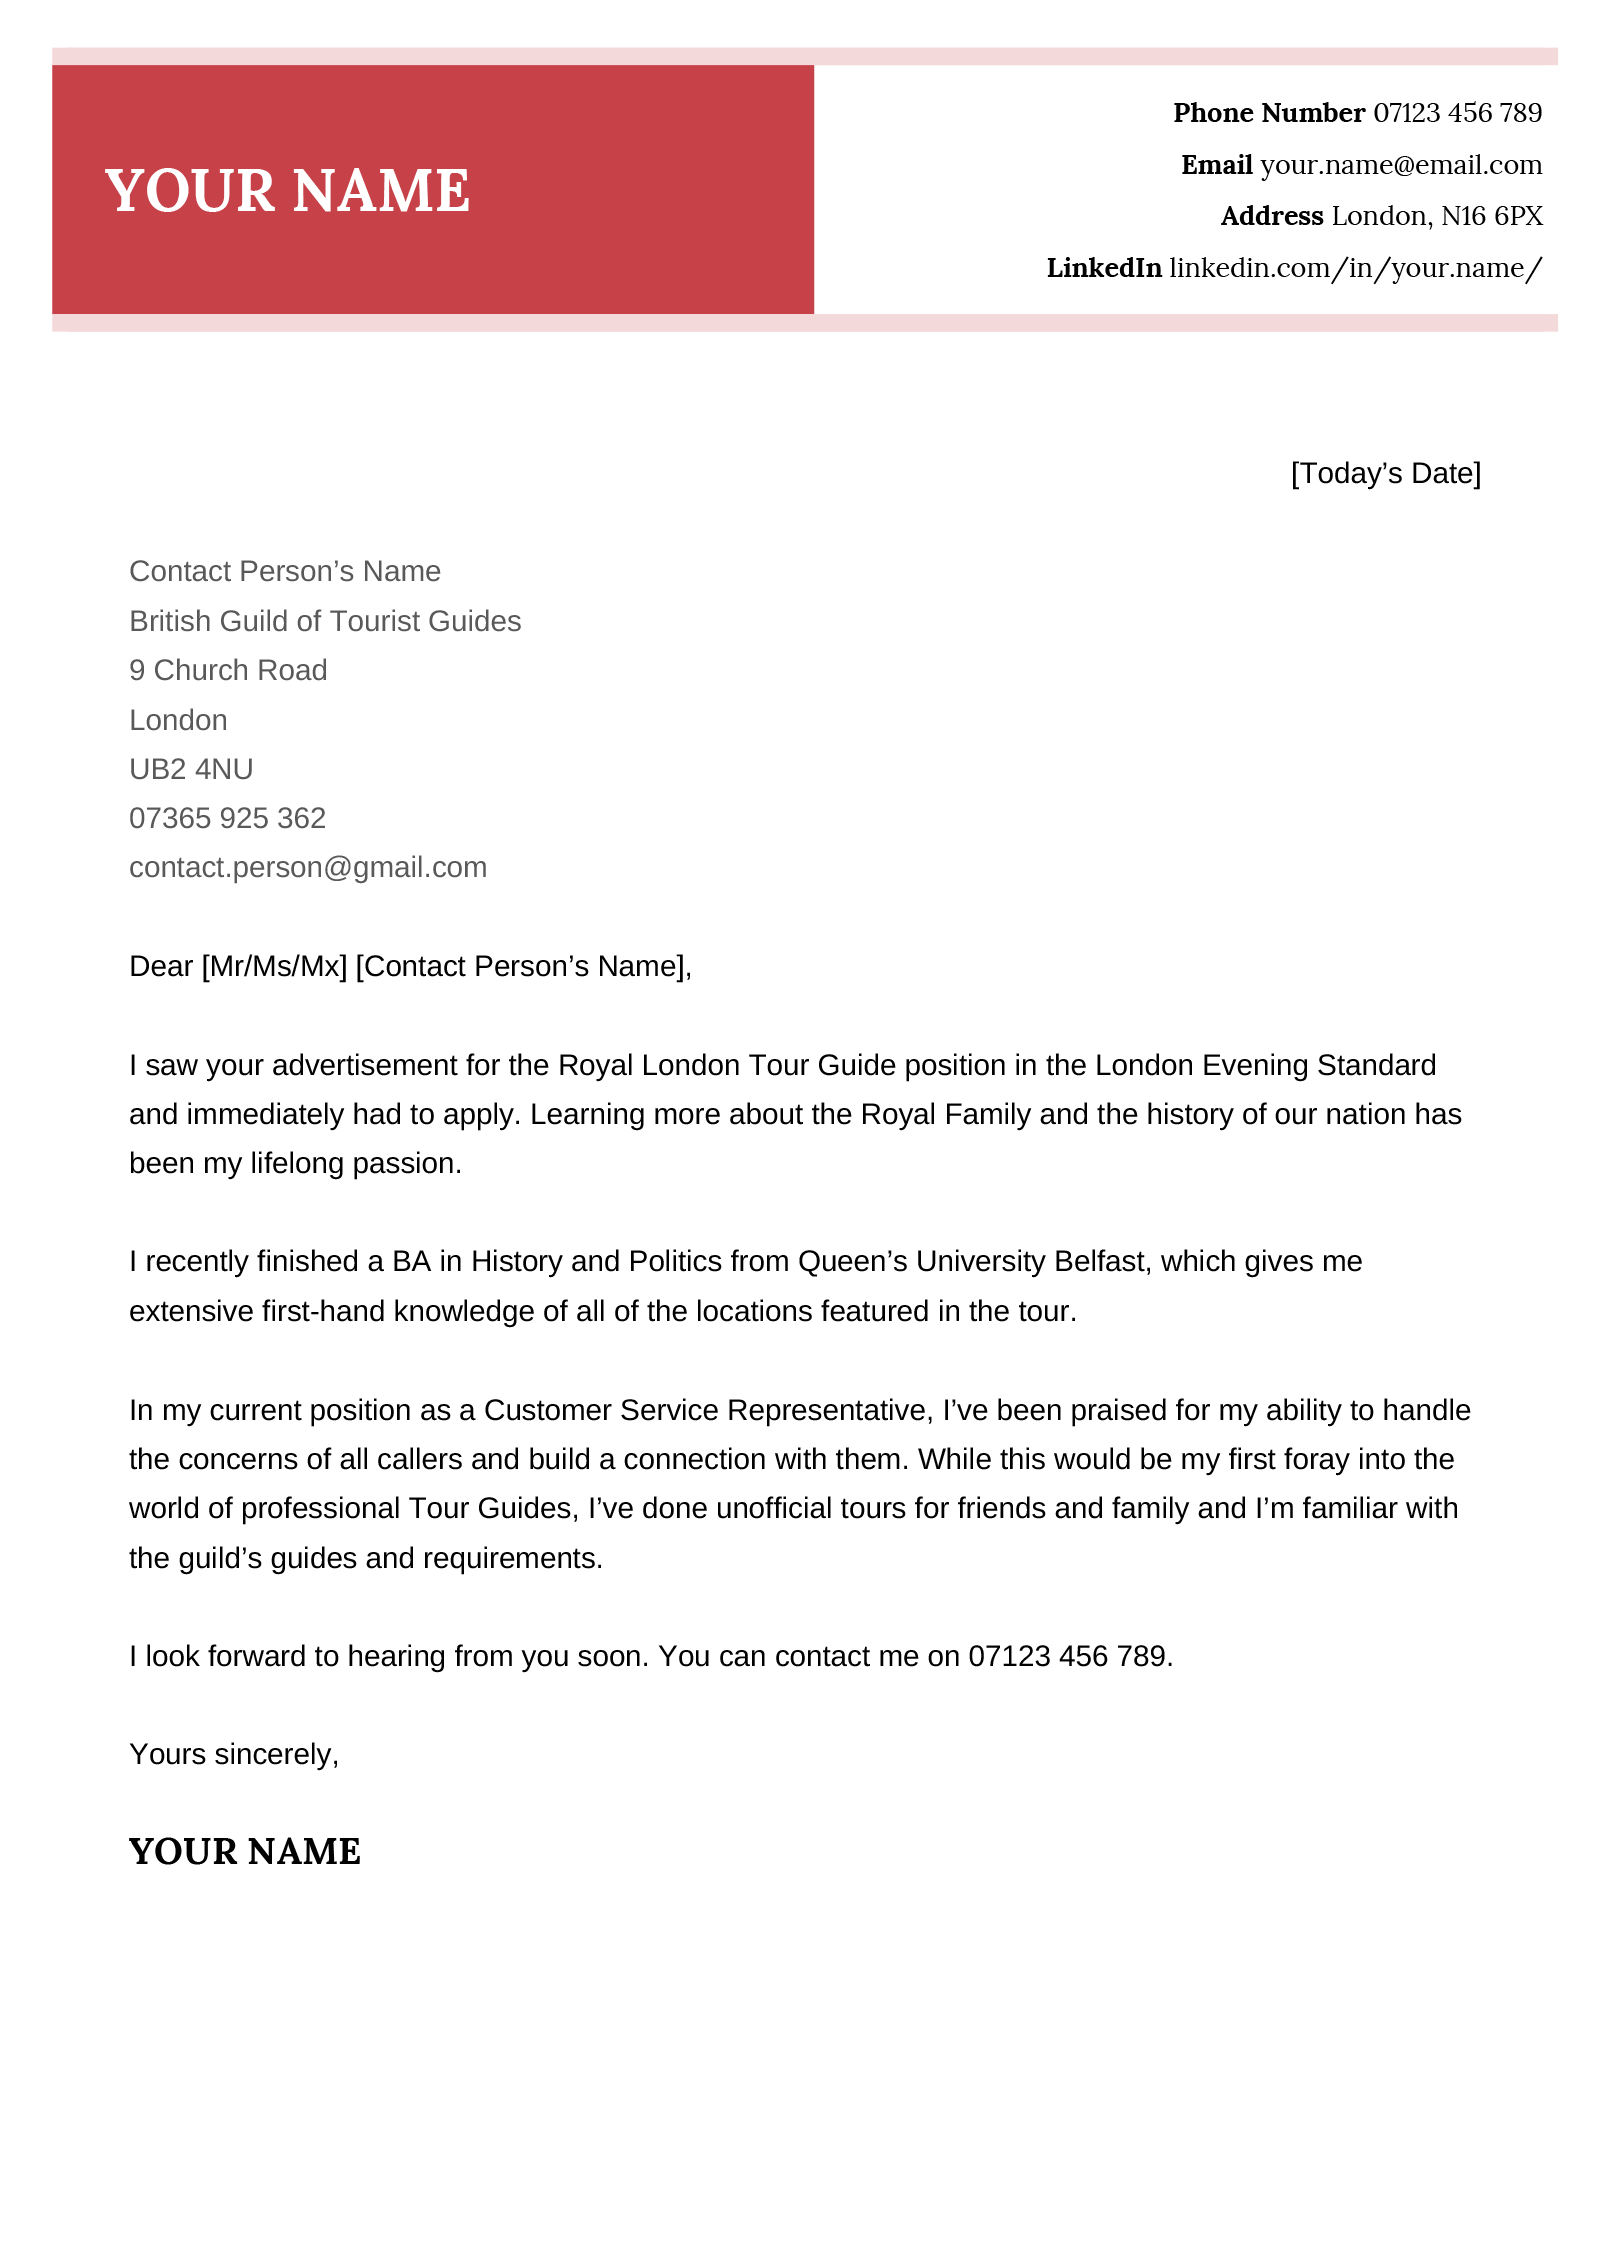 A short cover letter sample for a tour guiding job with a burgundy header and a few paragraphs of text.